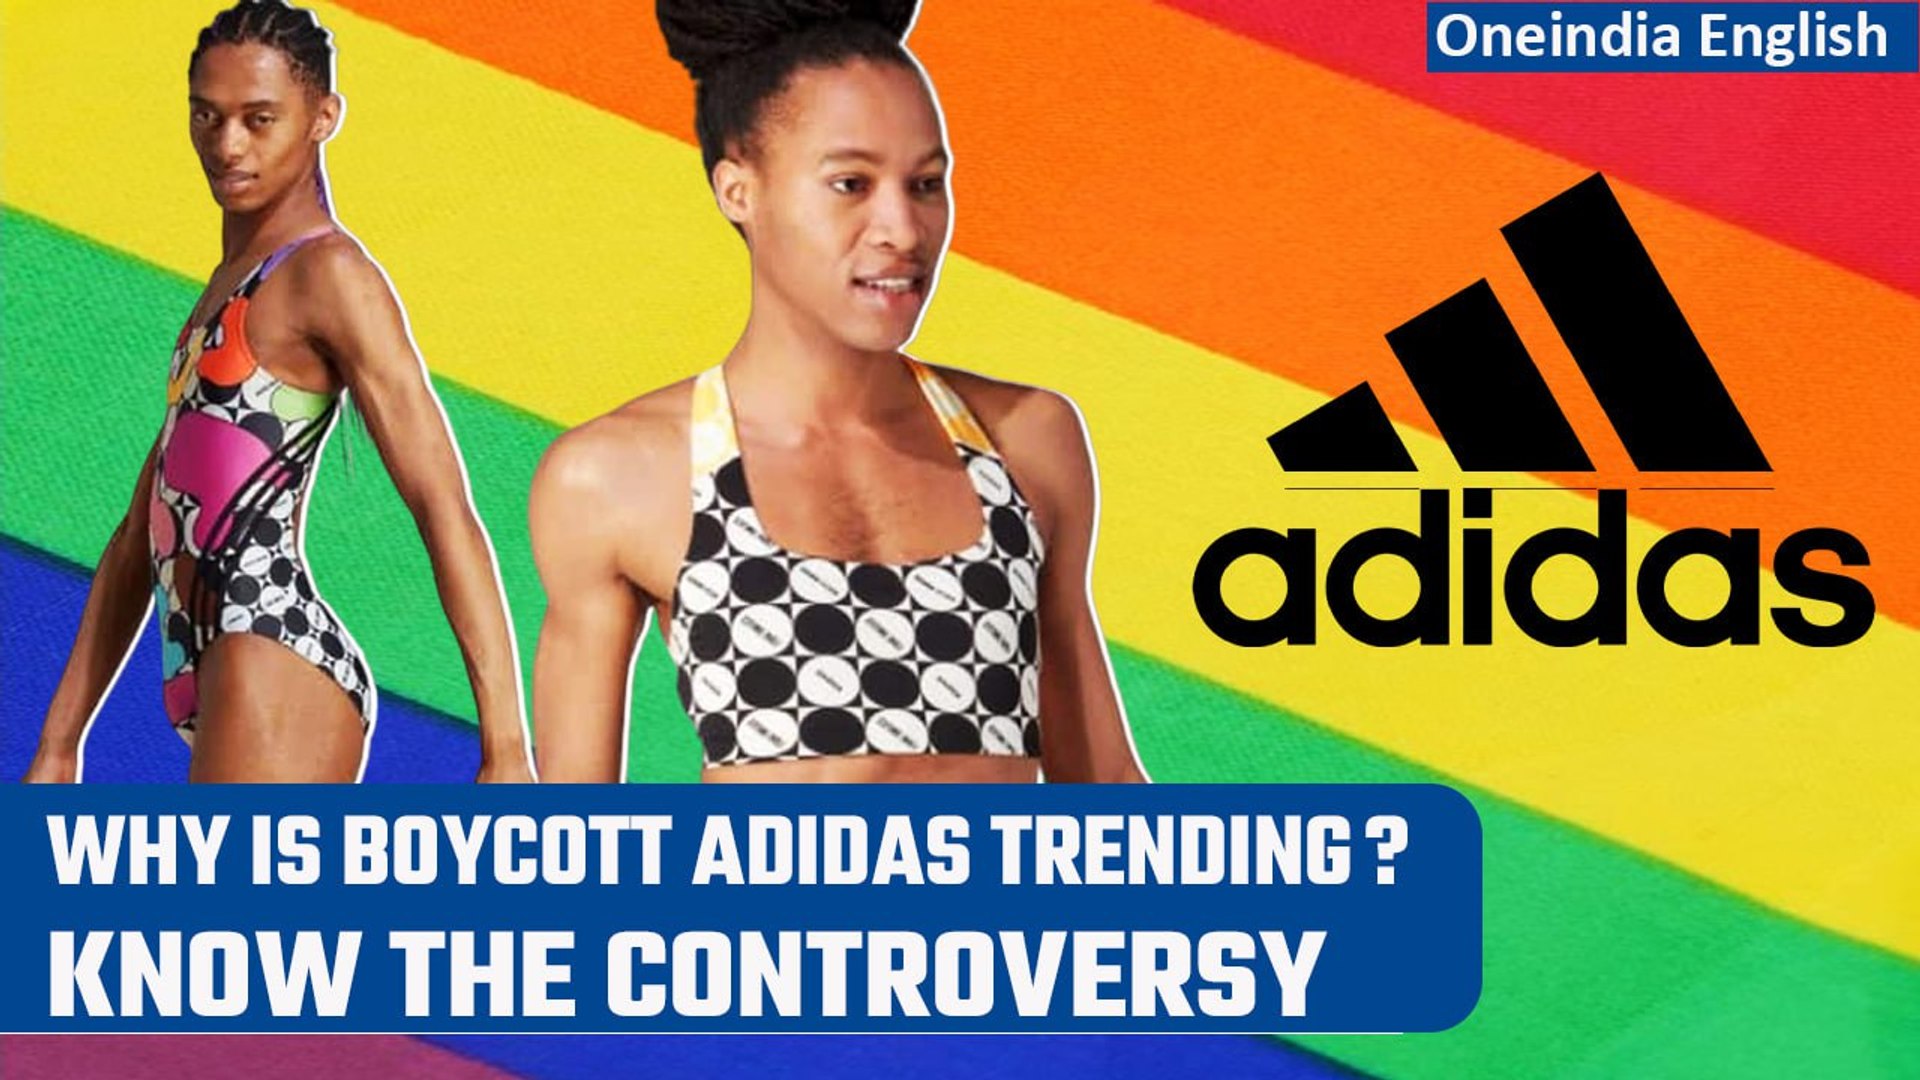 Adidas swimwear ad is an 'insult' to women